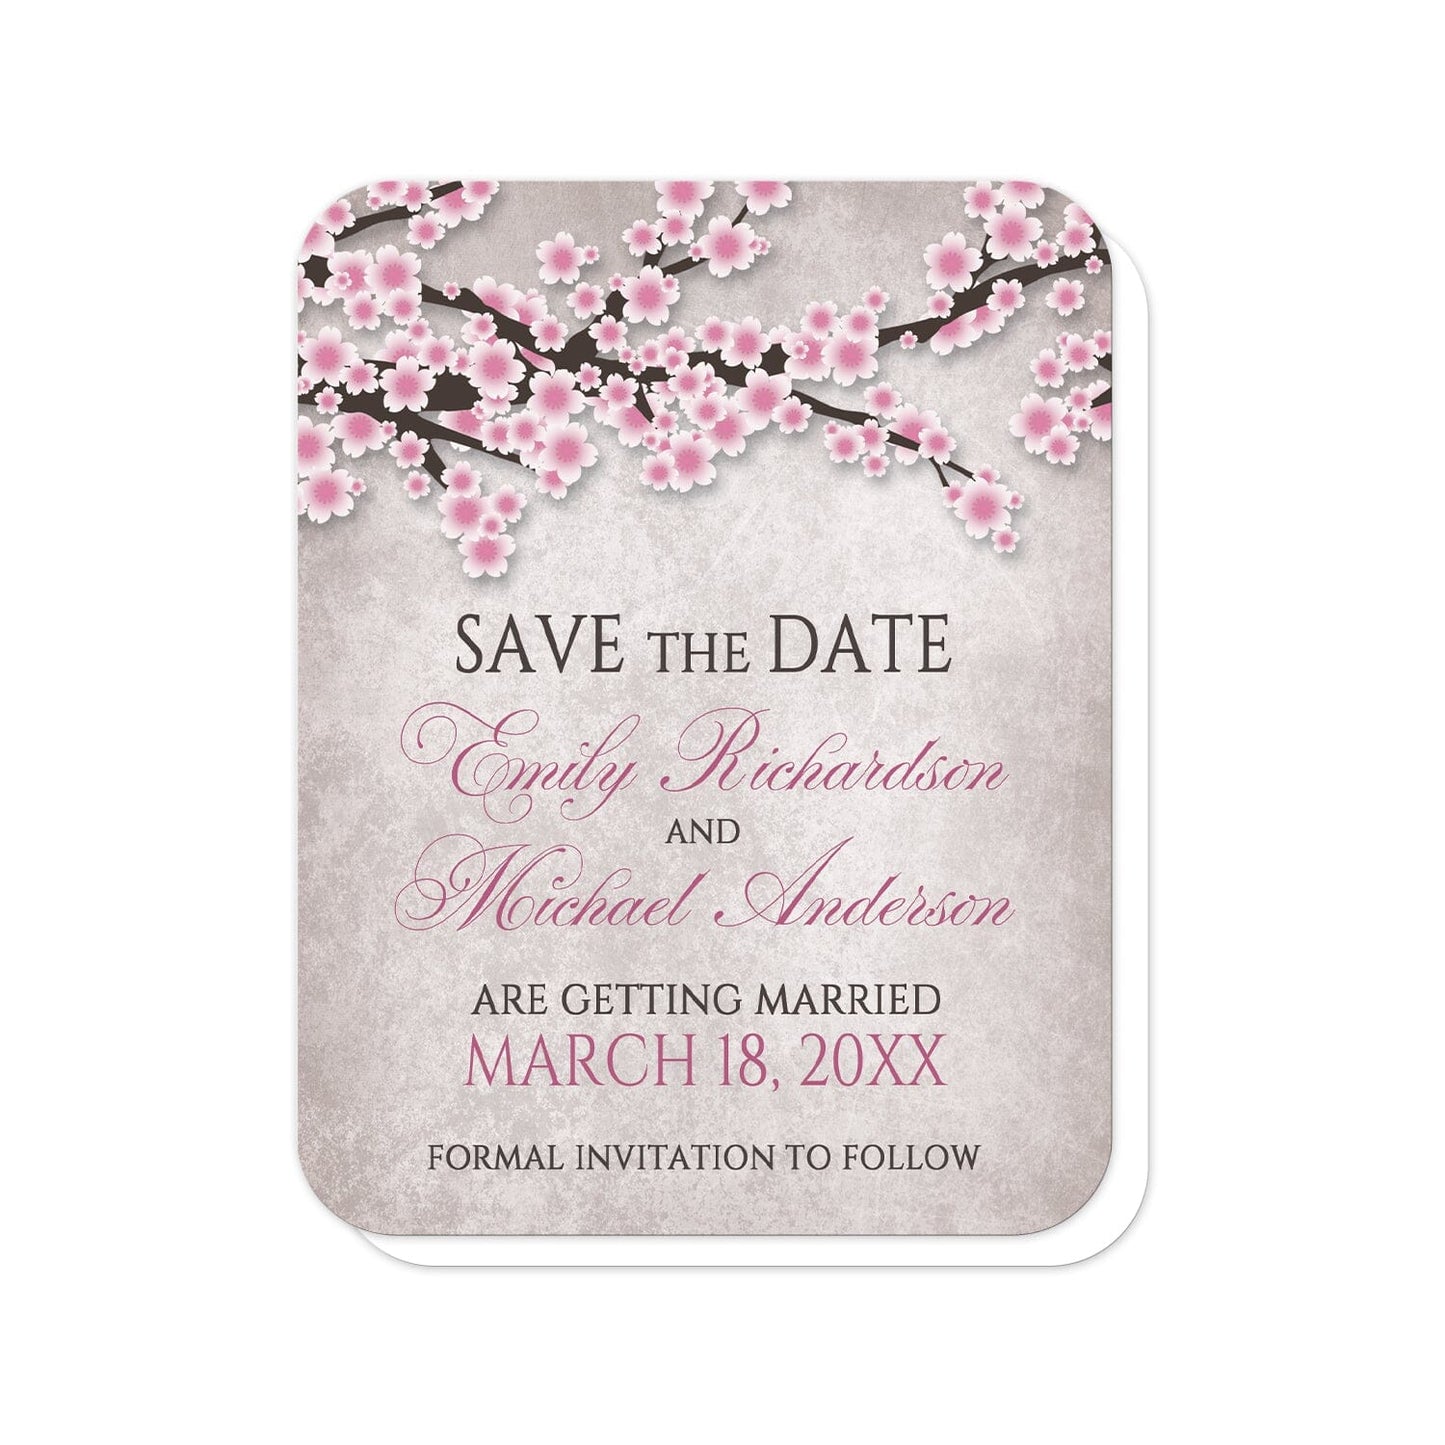 Rustic Pink Cherry Blossom Save the Date Cards (with rounded corners) at Artistically Invited. Rustic pink cherry blossom save the date cards featuring an illustration of pink and white with dark brown cherry blossom branches along the top. Your personalized wedding date details are custom printed in pink and dark brown over a stony grayish brown background below the pretty cherry blossom branches. 